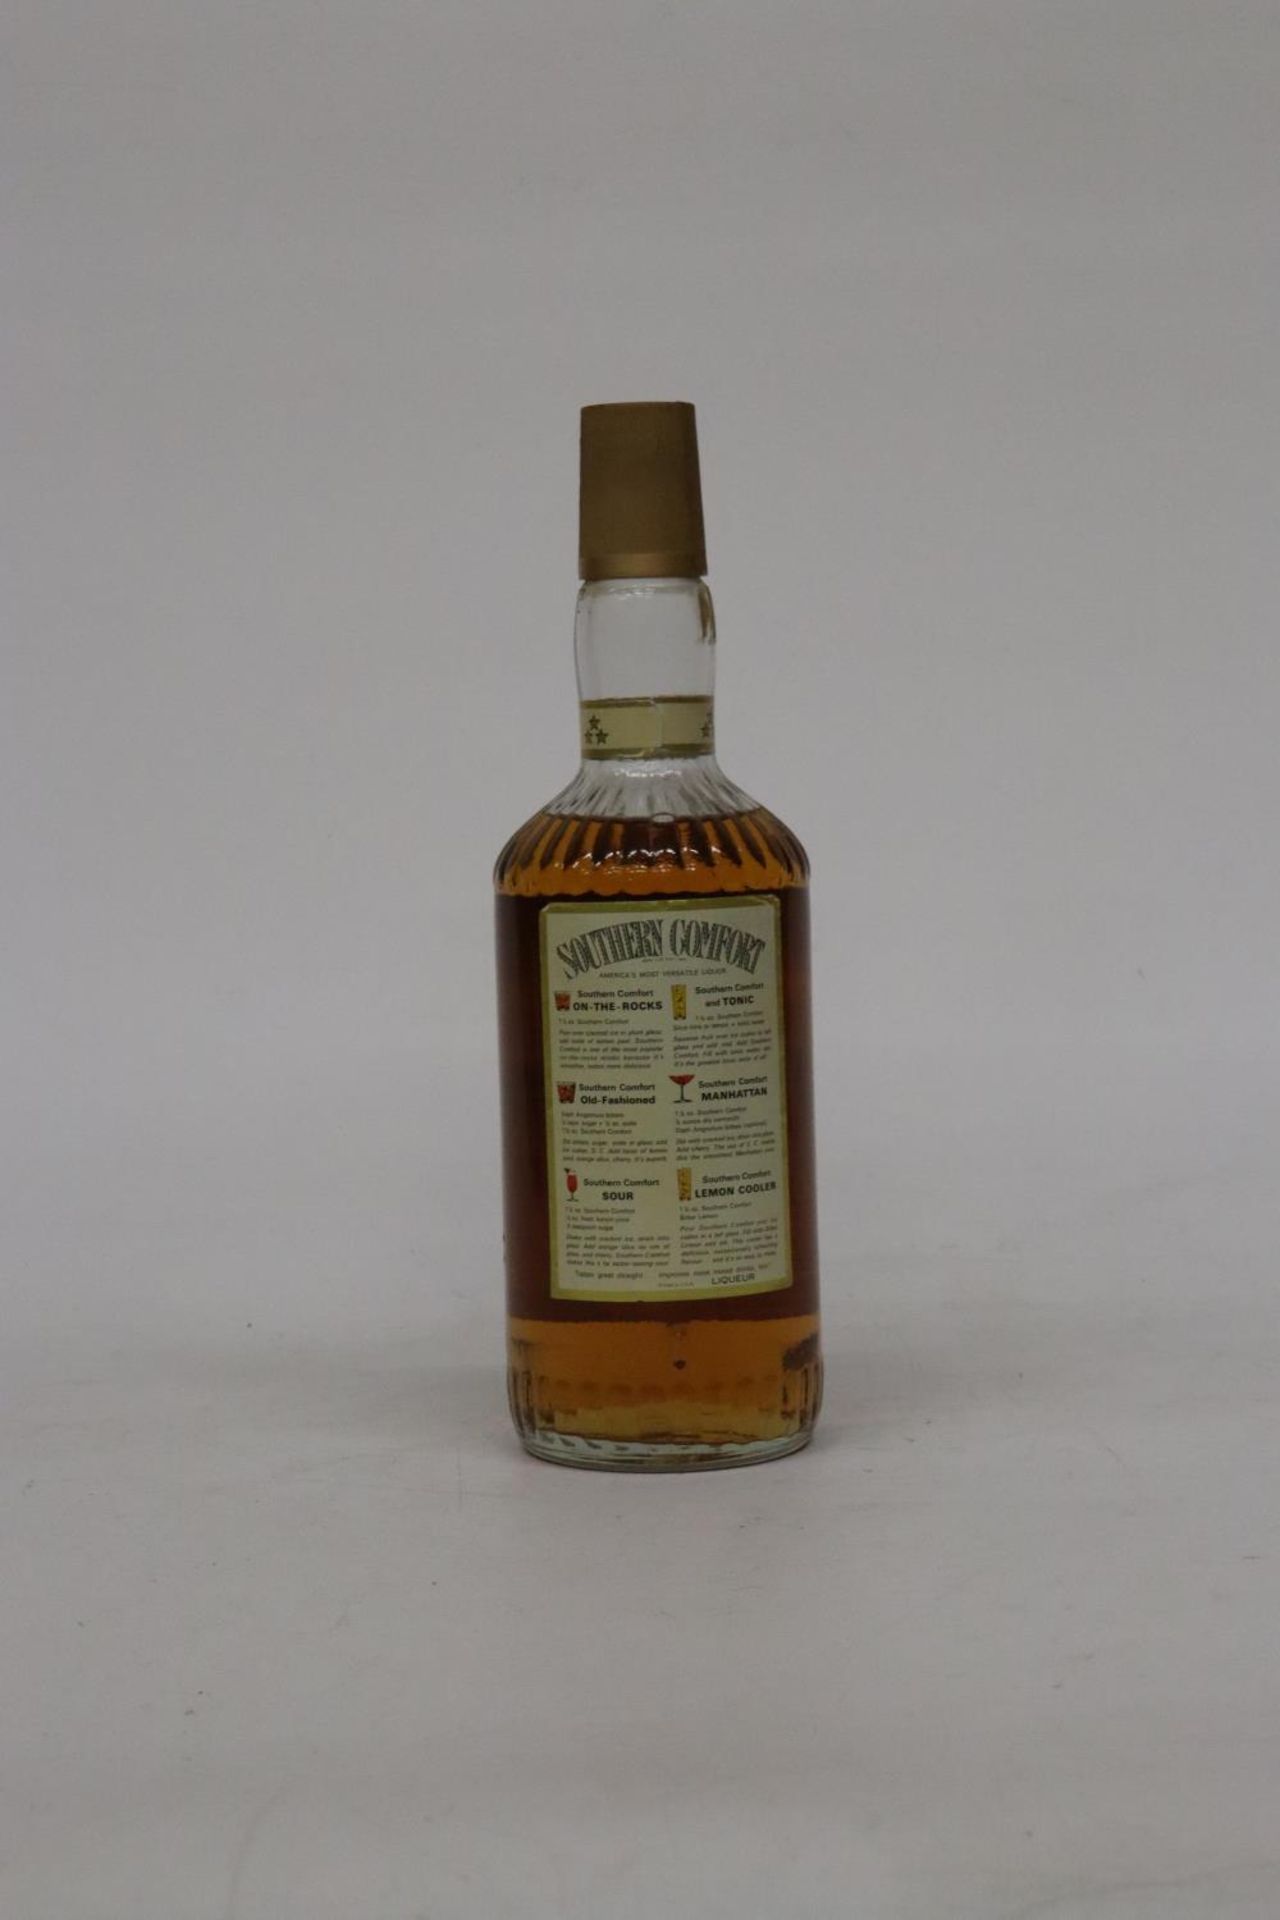 A 26 2/3 FL OZS BOTTLE OF SOUTHERN COMFORT 87.7 PROOFWHISKY - Image 2 of 2